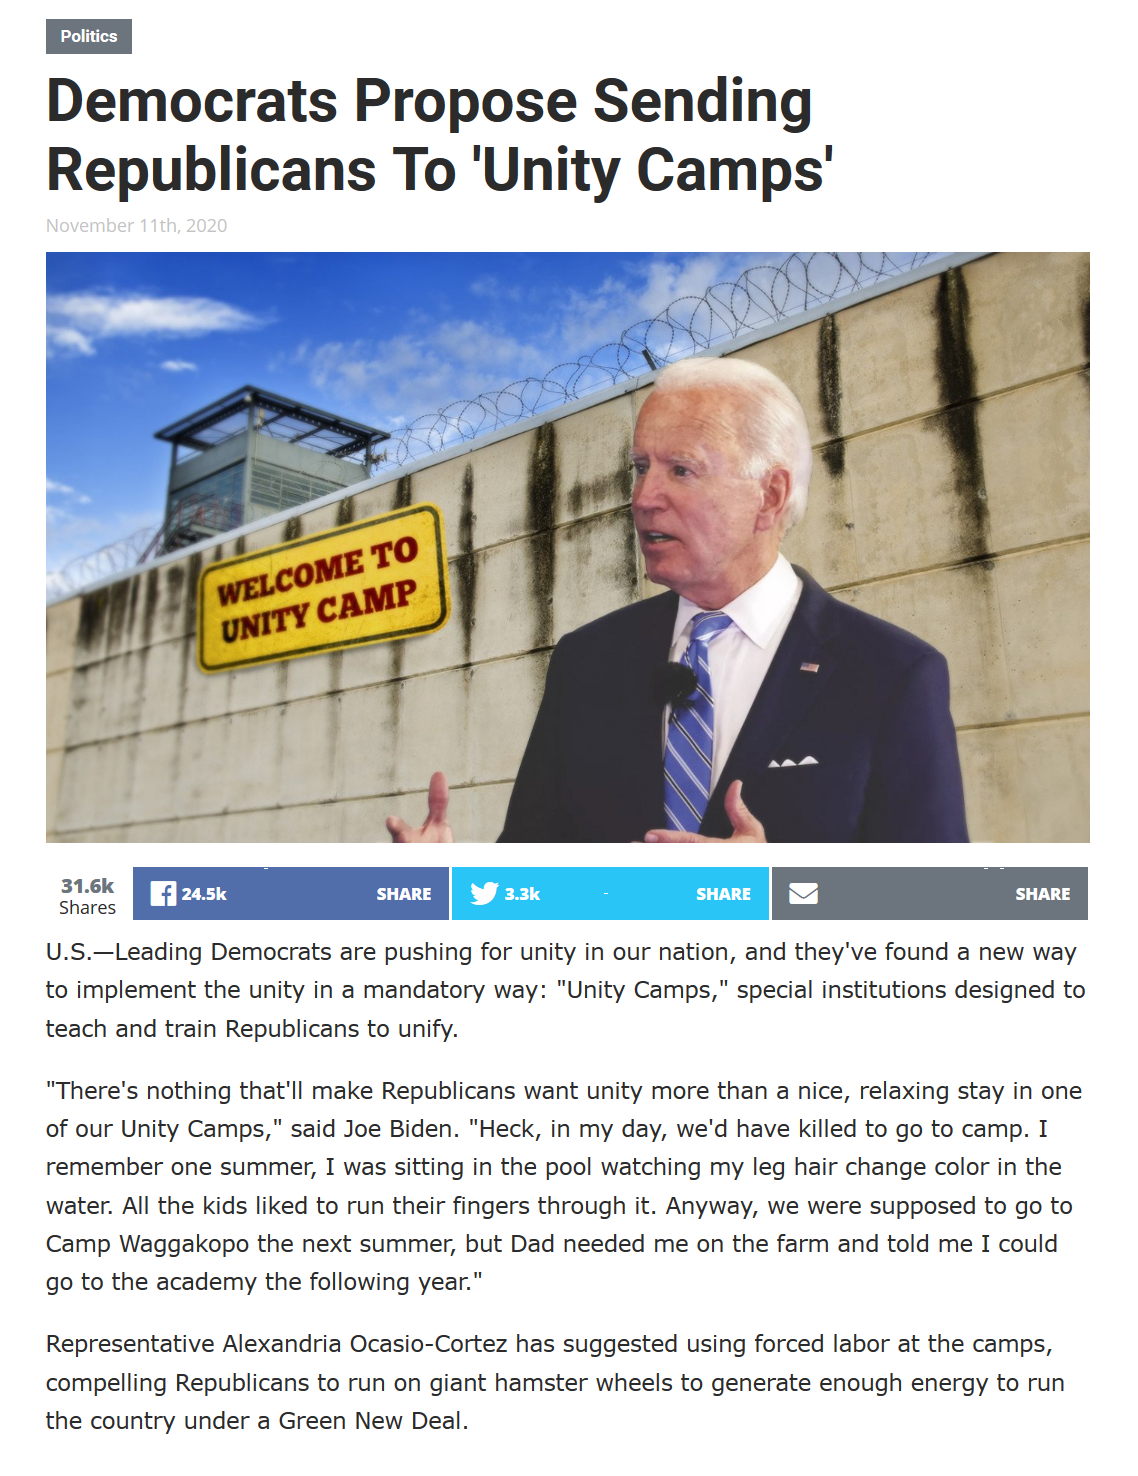 Unity camp, teaching Trumpers how to get along with them